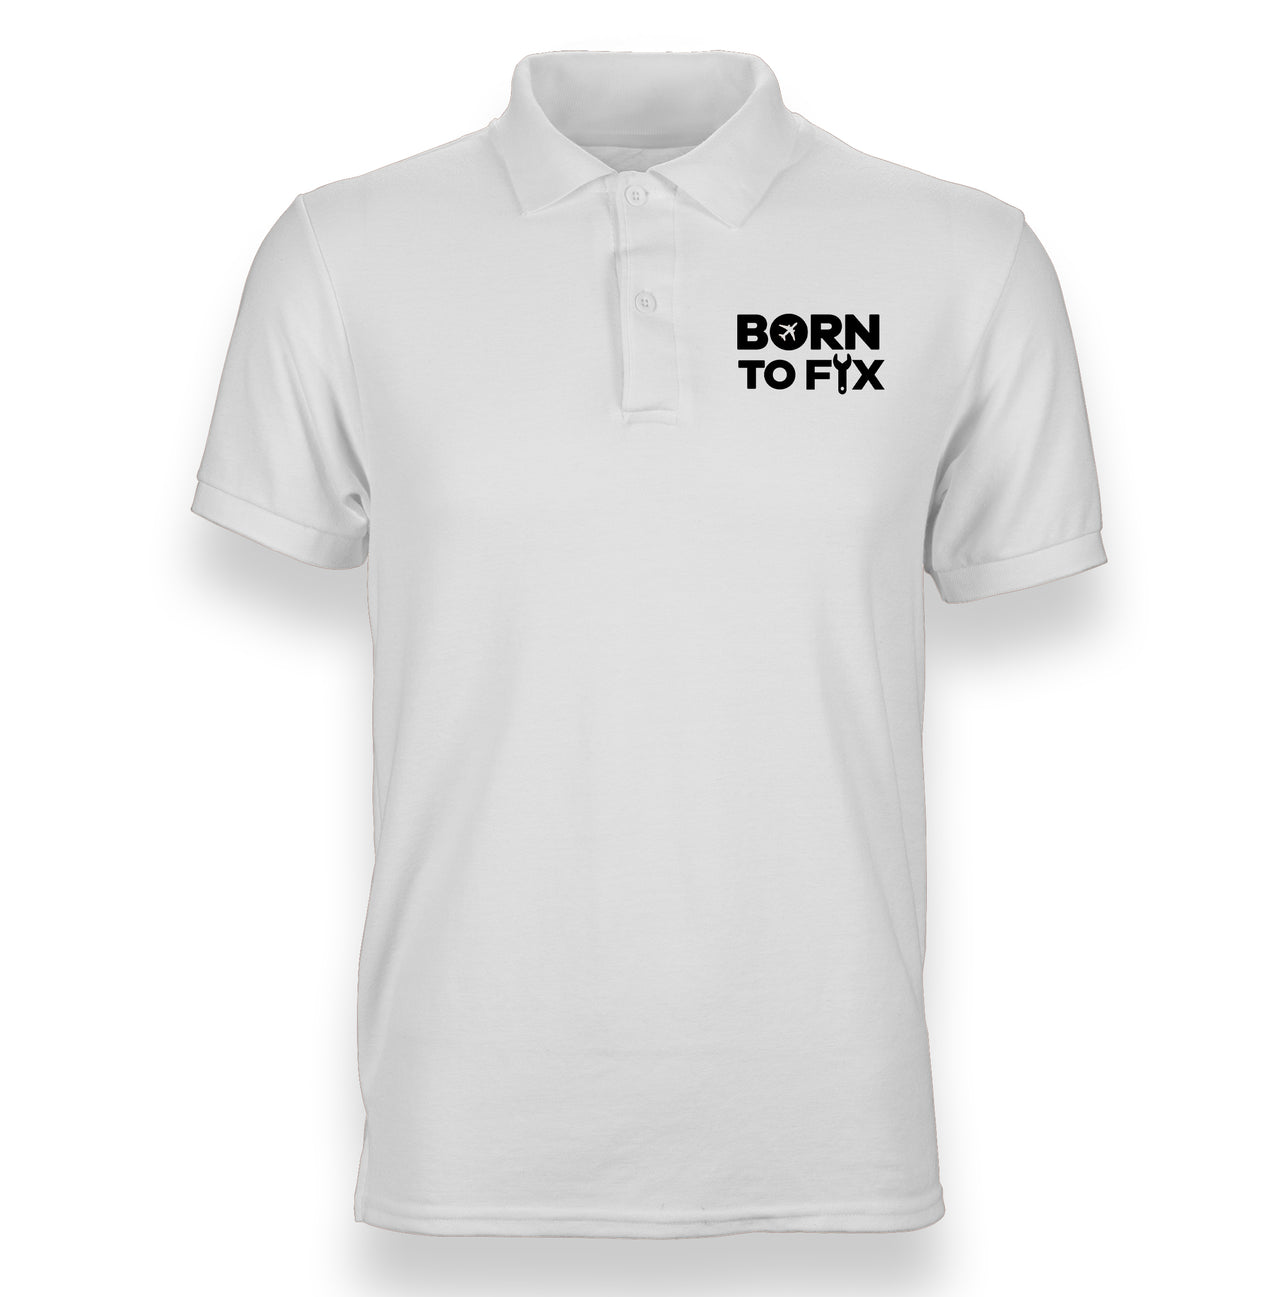 Born To Fix Airplanes Designed "WOMEN" Polo T-Shirts